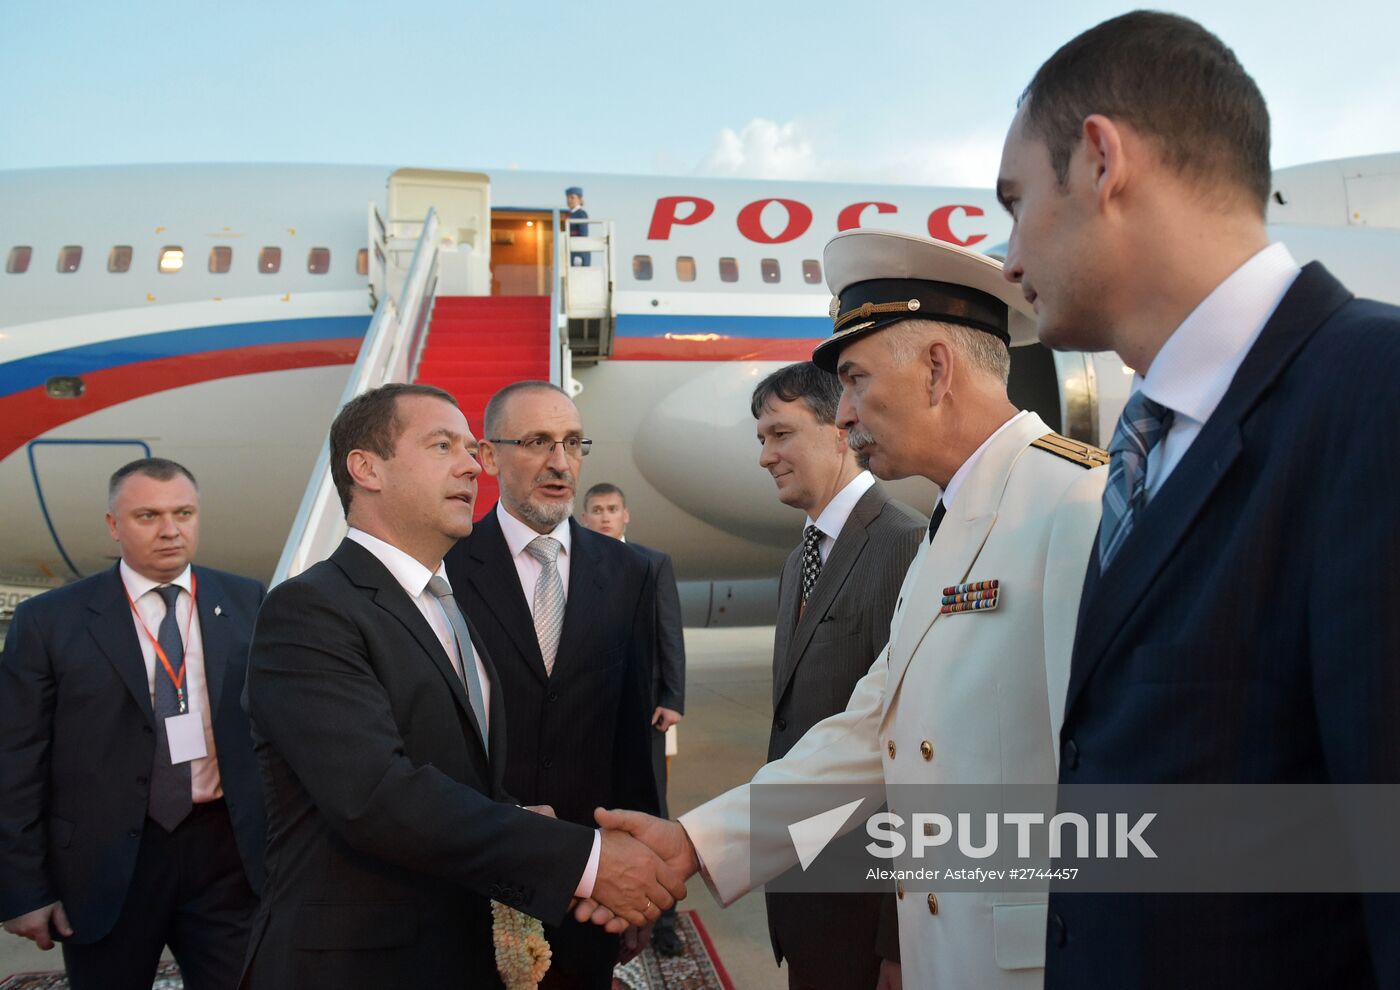 Russian Prime Minister Dmitry Medvedev's working trip to Cambodia